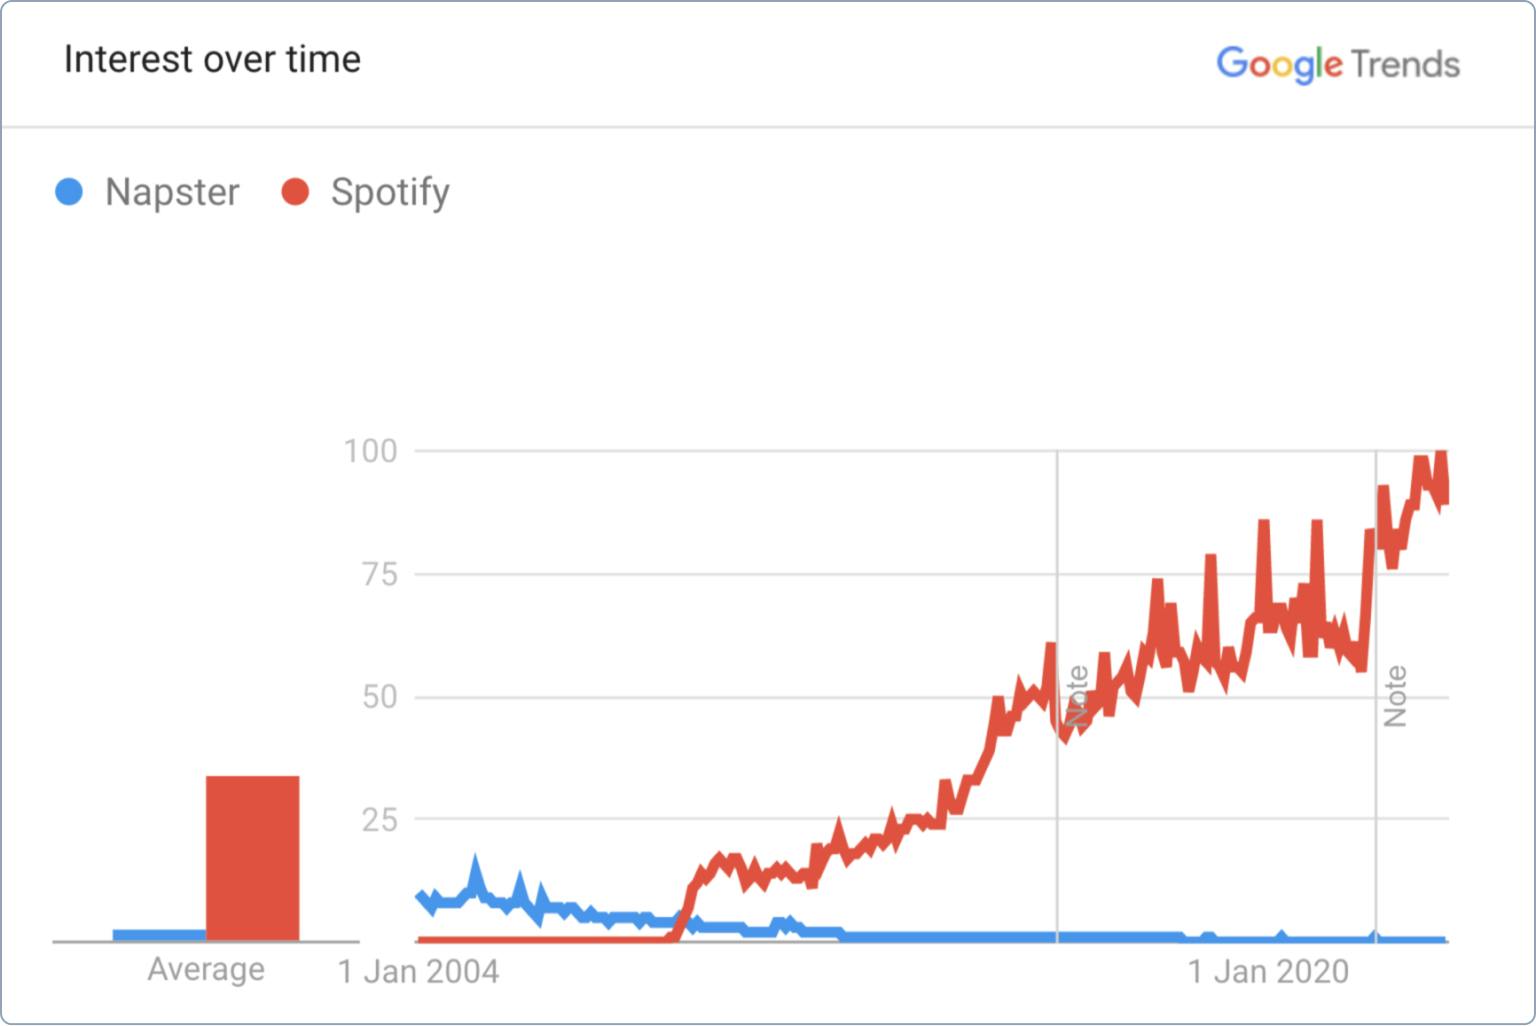 An image of Google Trends showing the difference between searches for Napster and Spotify over time. Napster trends down to zero. Spotify trends up significantly.